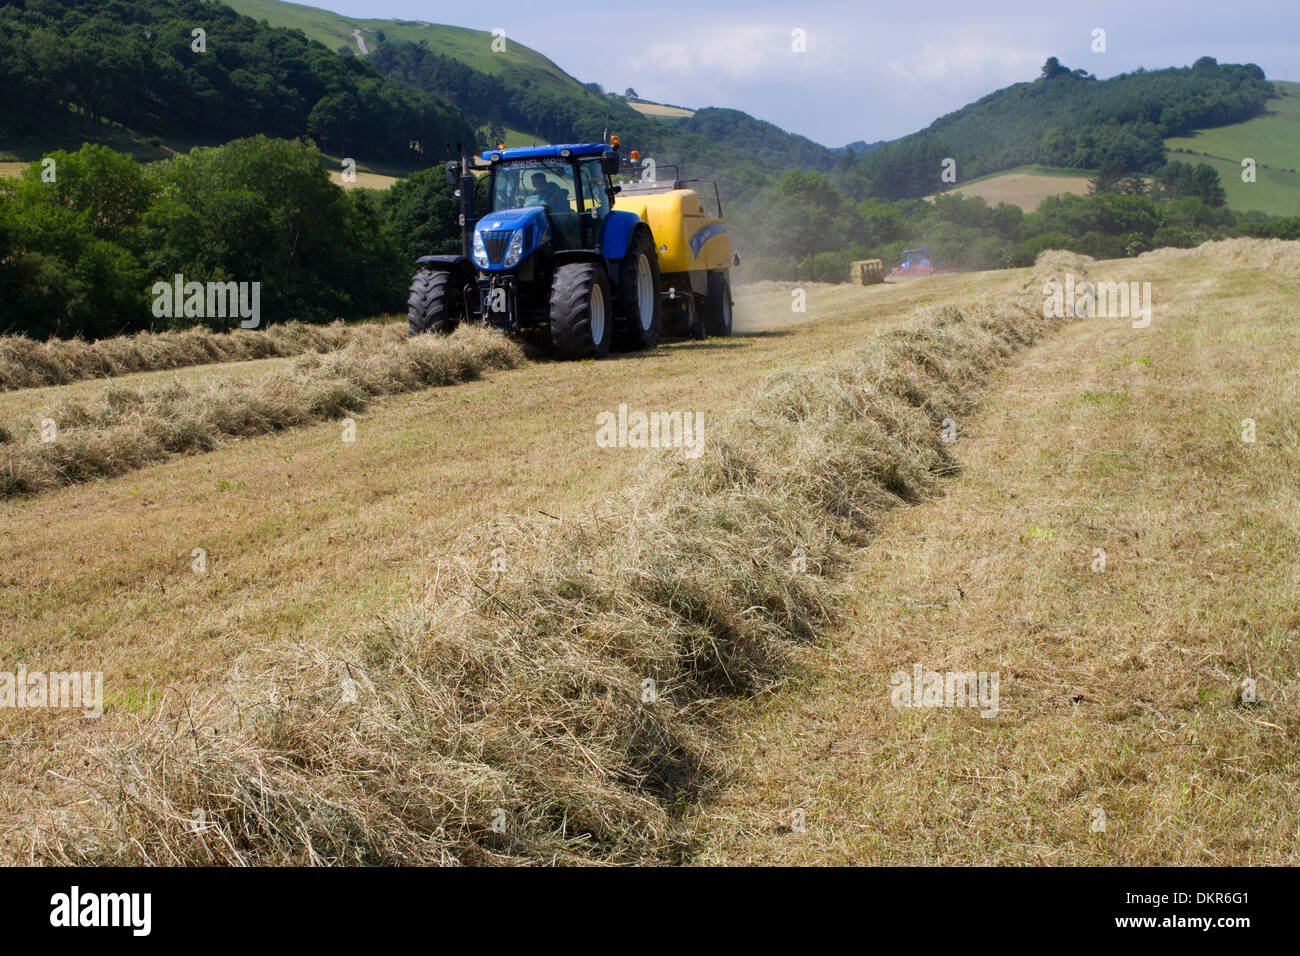 Contractor with a New Holland T7040 tractor and a New Holland big-square baler baling hay on an Organic farm. Stock Photo